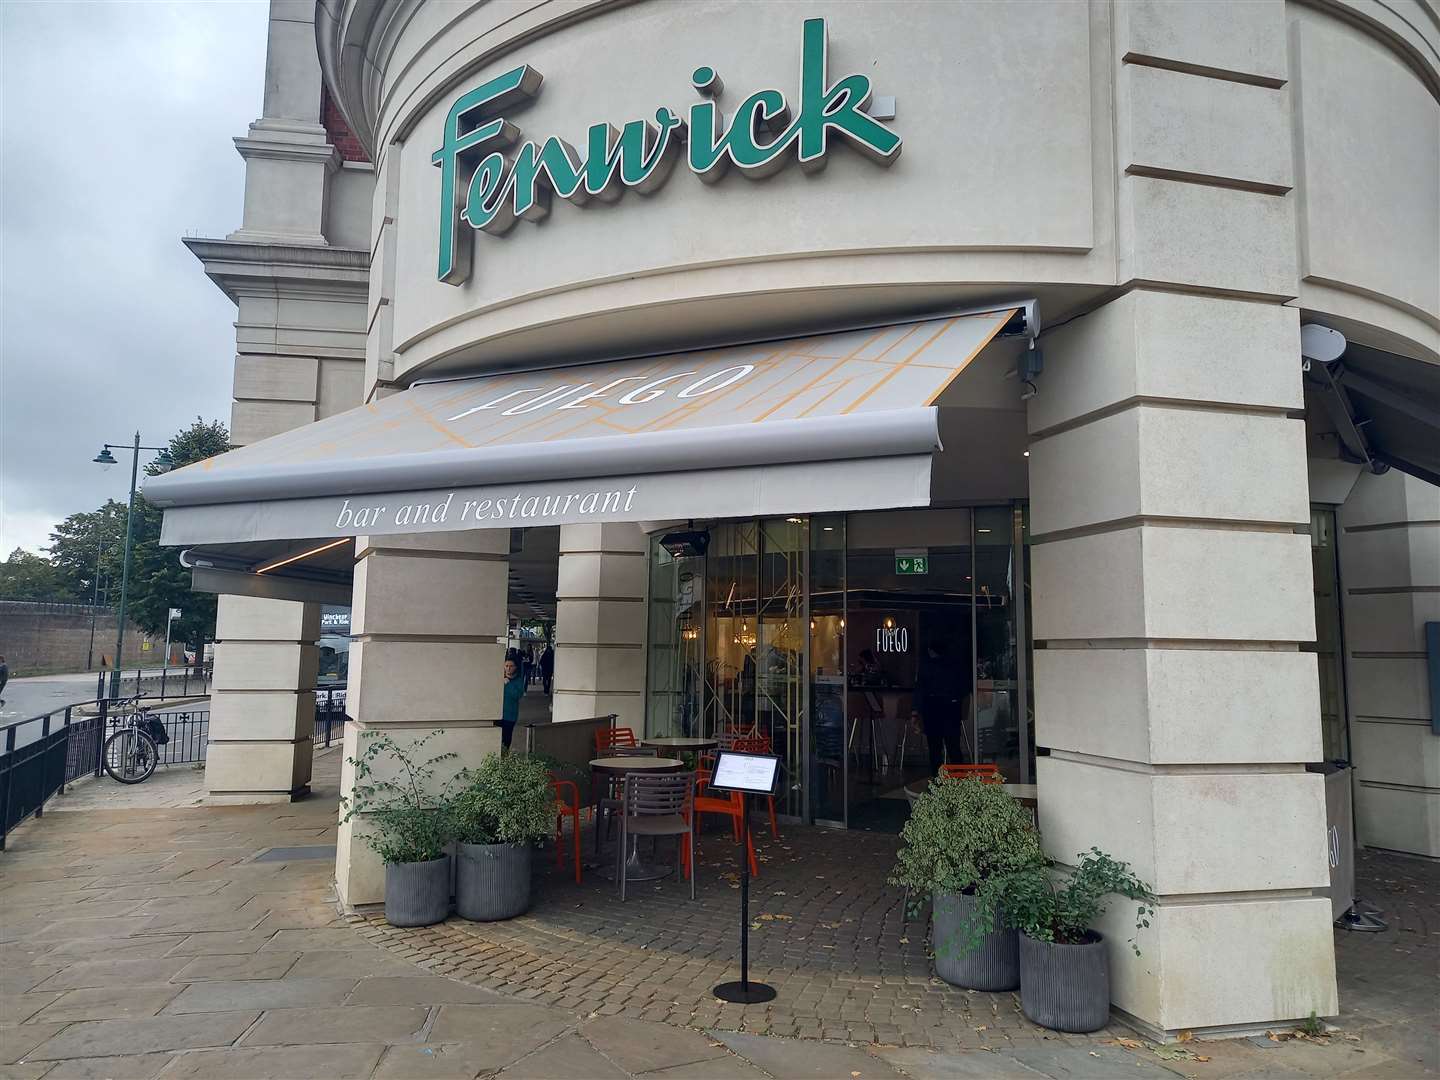 Fenwick, the flagship store of Whitefriars, now has a new restaurant at the rear